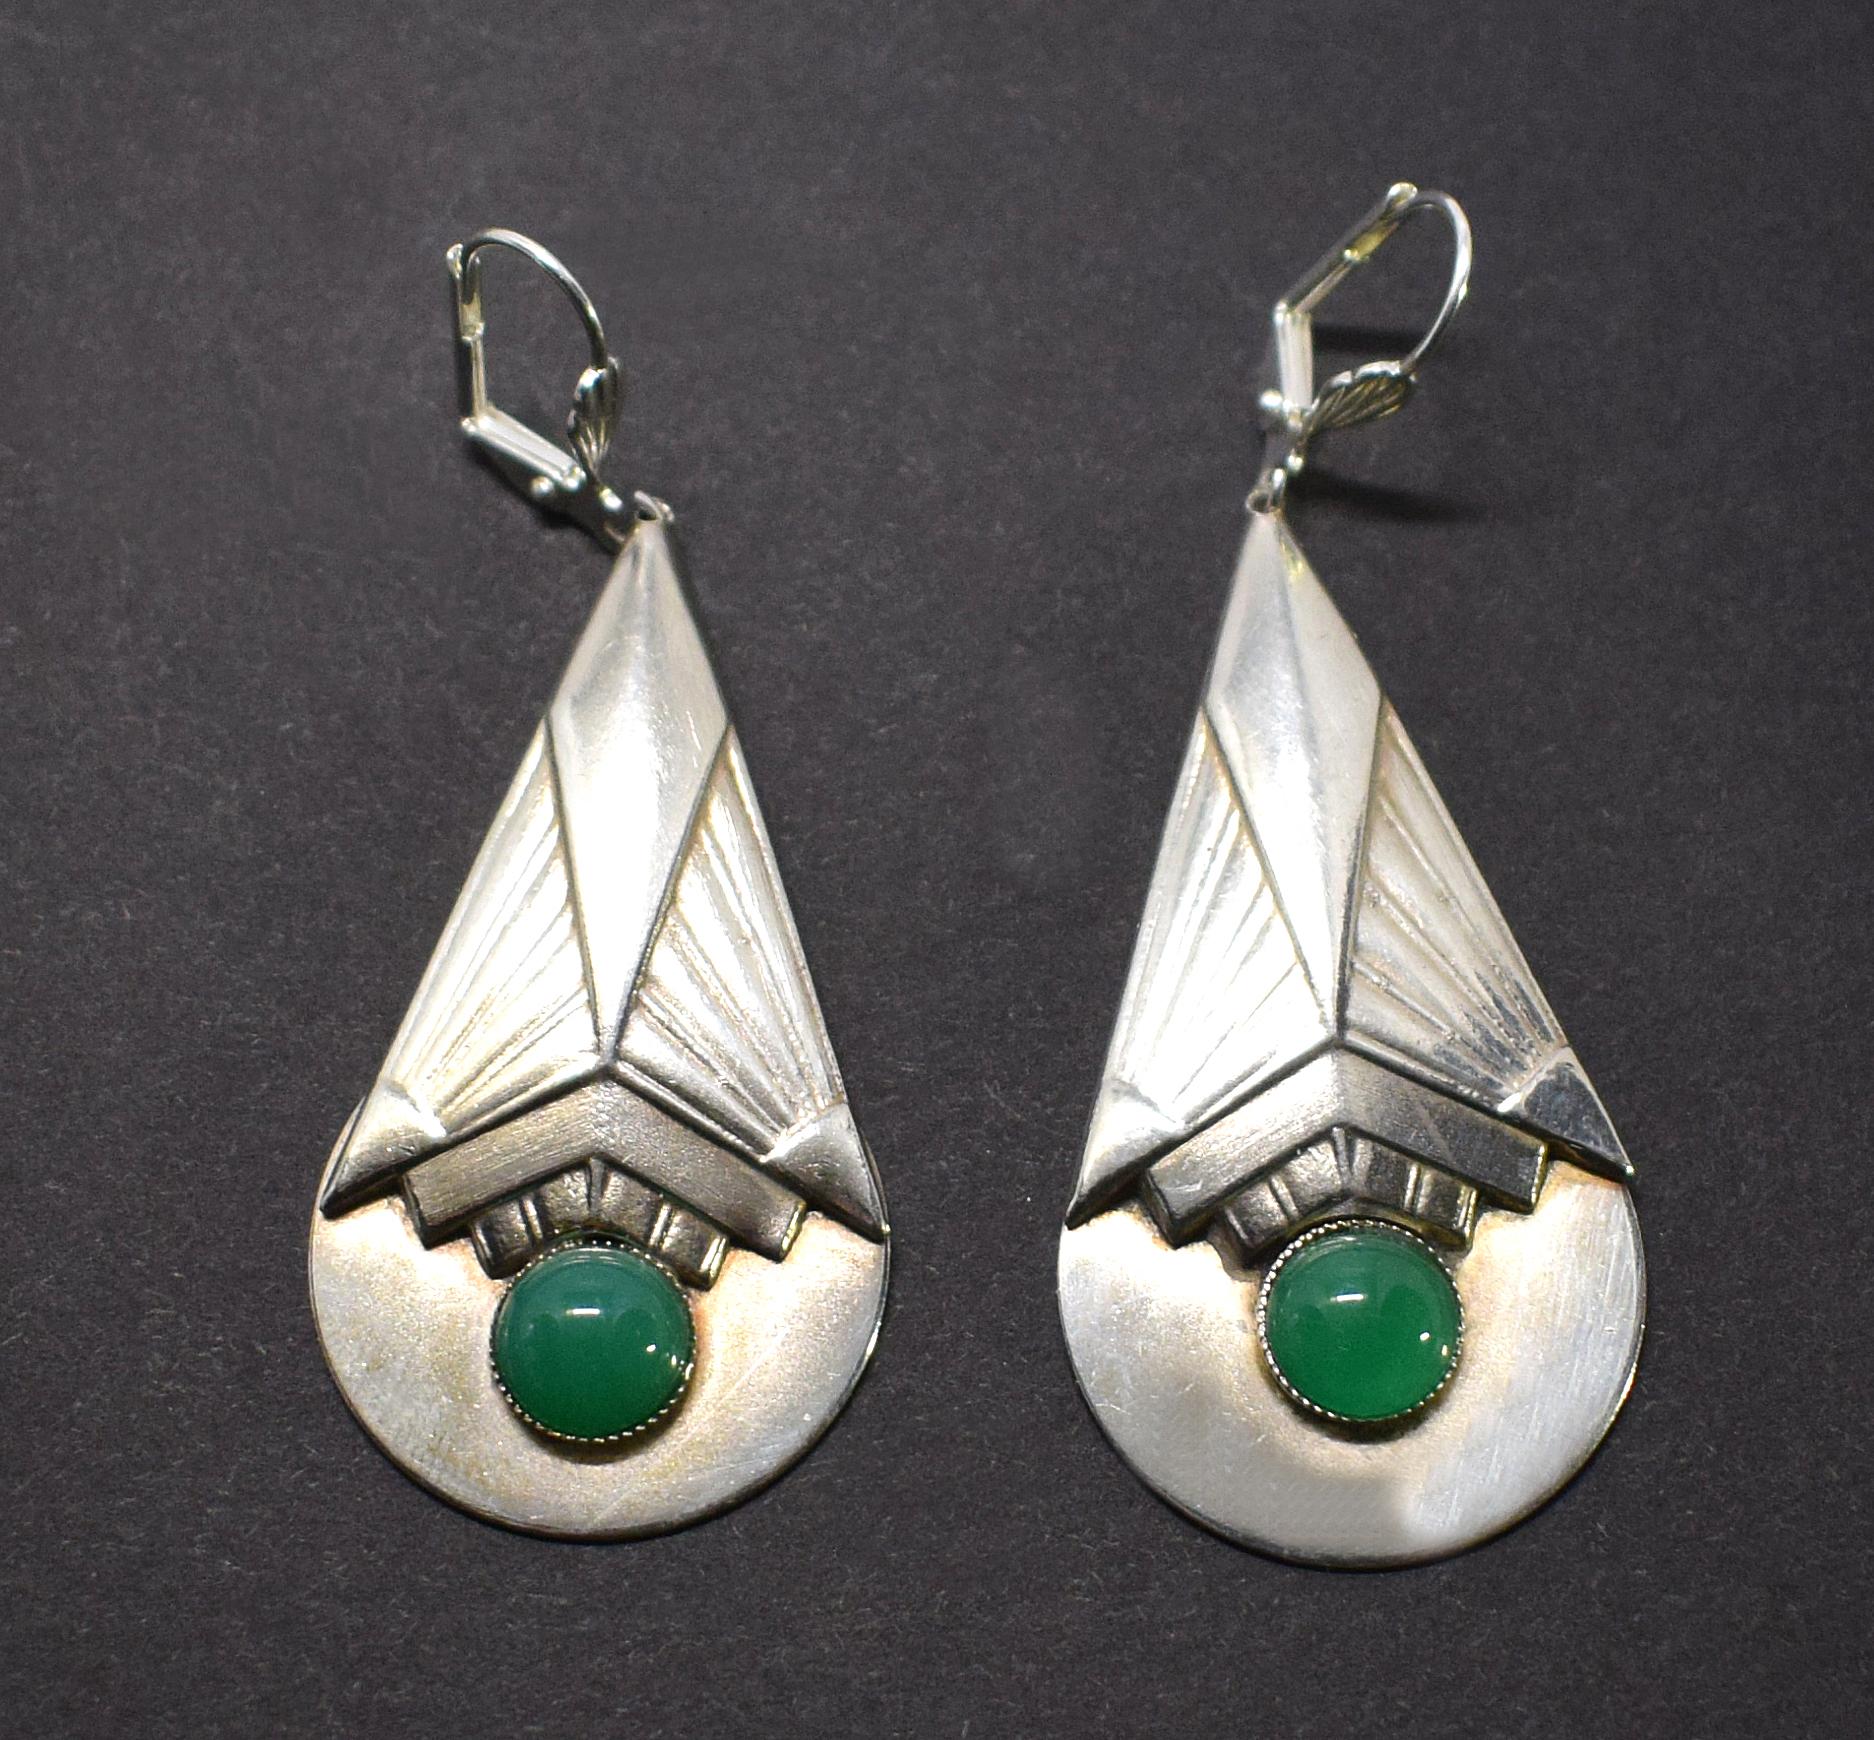 Super stylish pair of Art Deco modernist earrings dating to the 1930's. Europe was one of the leading manufacturers of Art Deco jewellery in the 20's and 30's with very innovative and individual pieces of jewellery, aesthetically characterised by